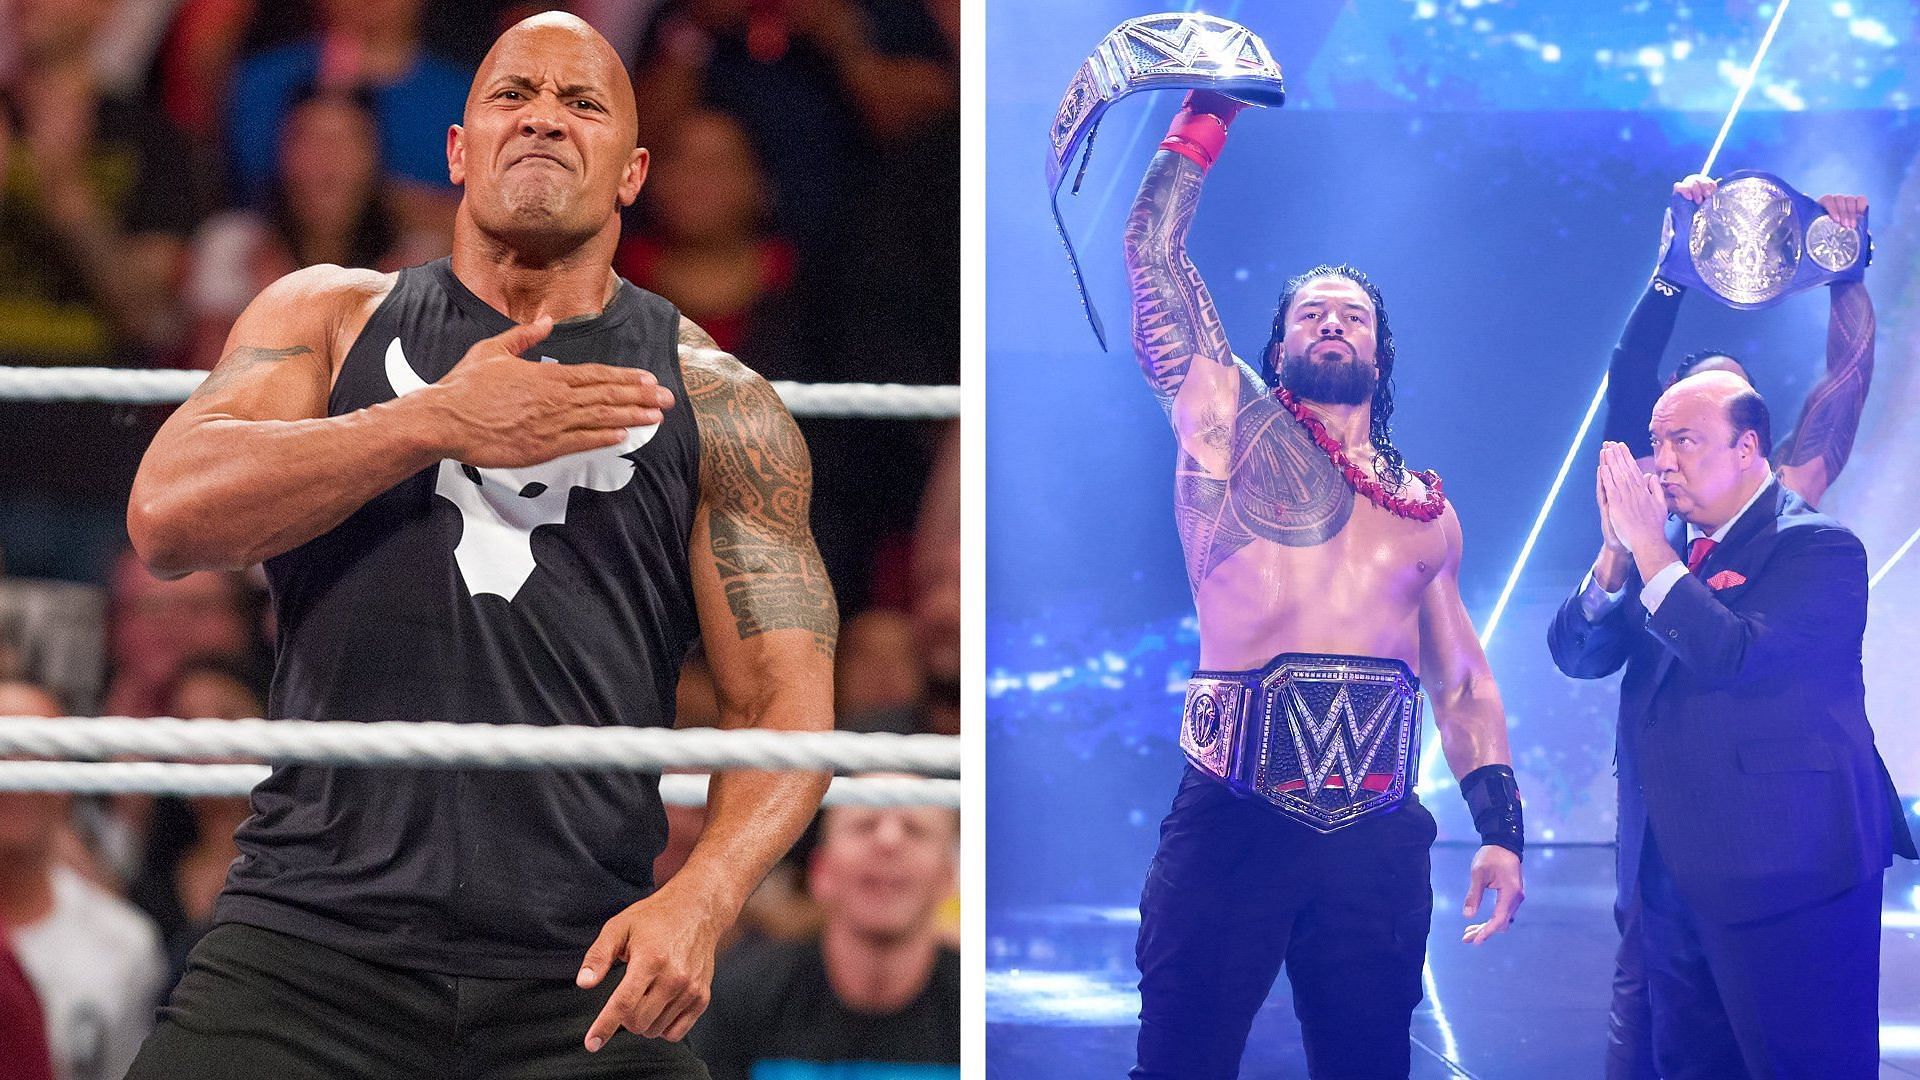 The Rock could potentially return to WWE in the coming months